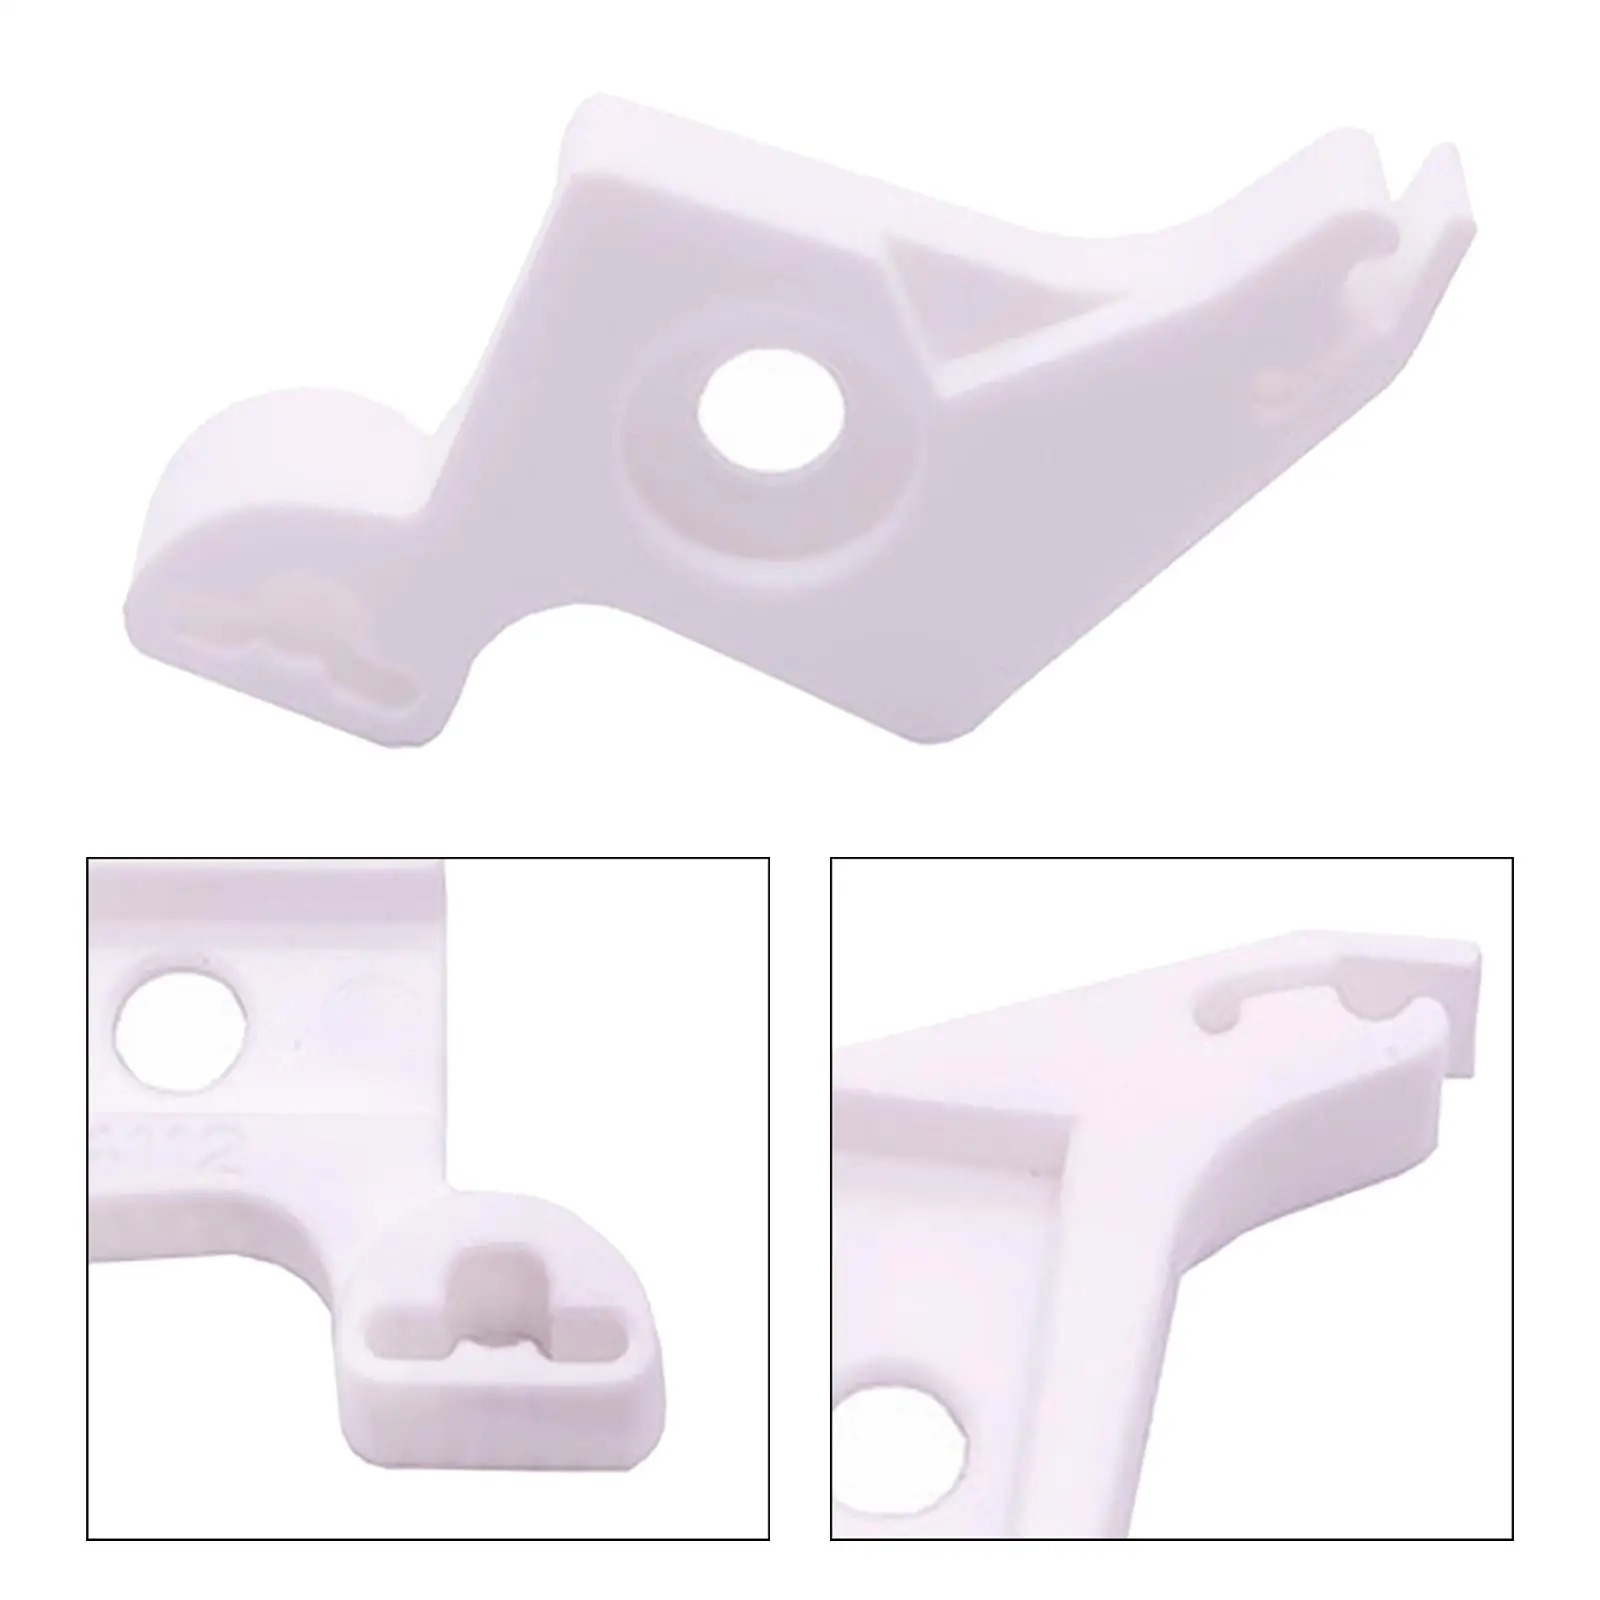 Presser Foot Holder Presser Foots Snap on Adapter Stable Practical 4124112-01 Useful for Darning Quilting Fabric Overlock Cloth